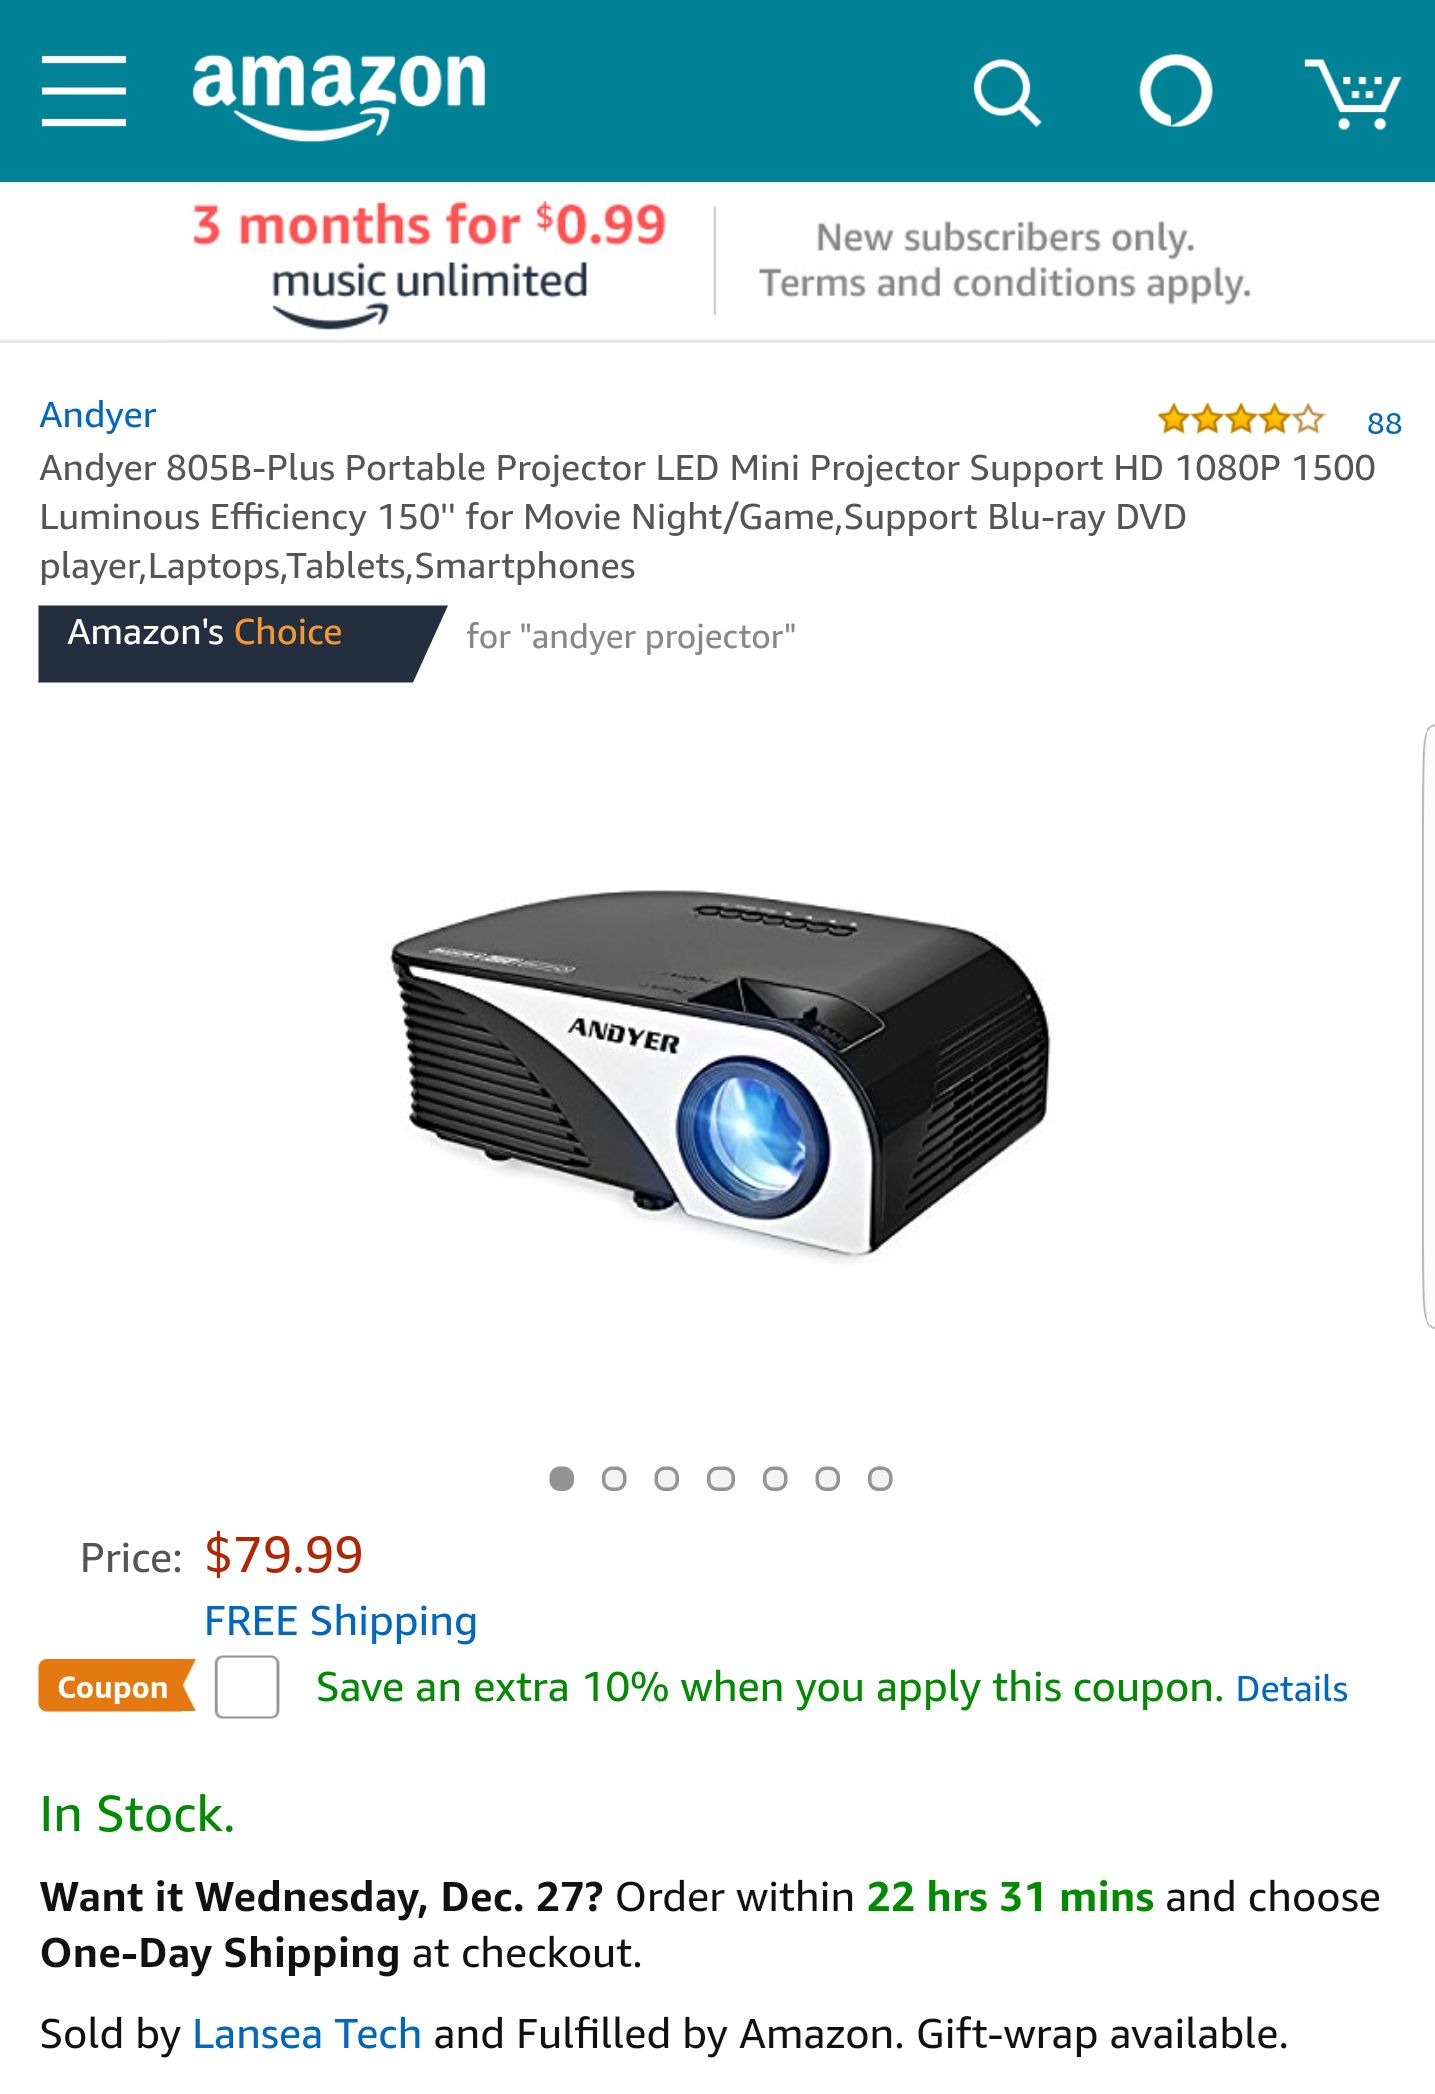 Andyer led projector